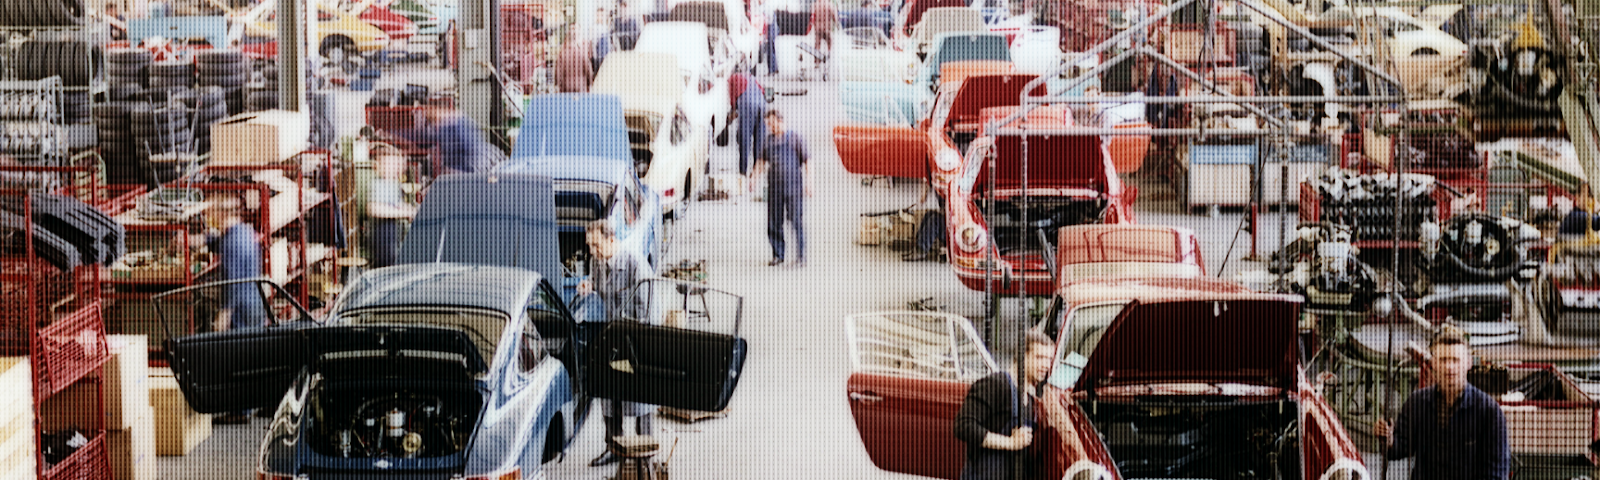 Porsche assembly line in the 1970s